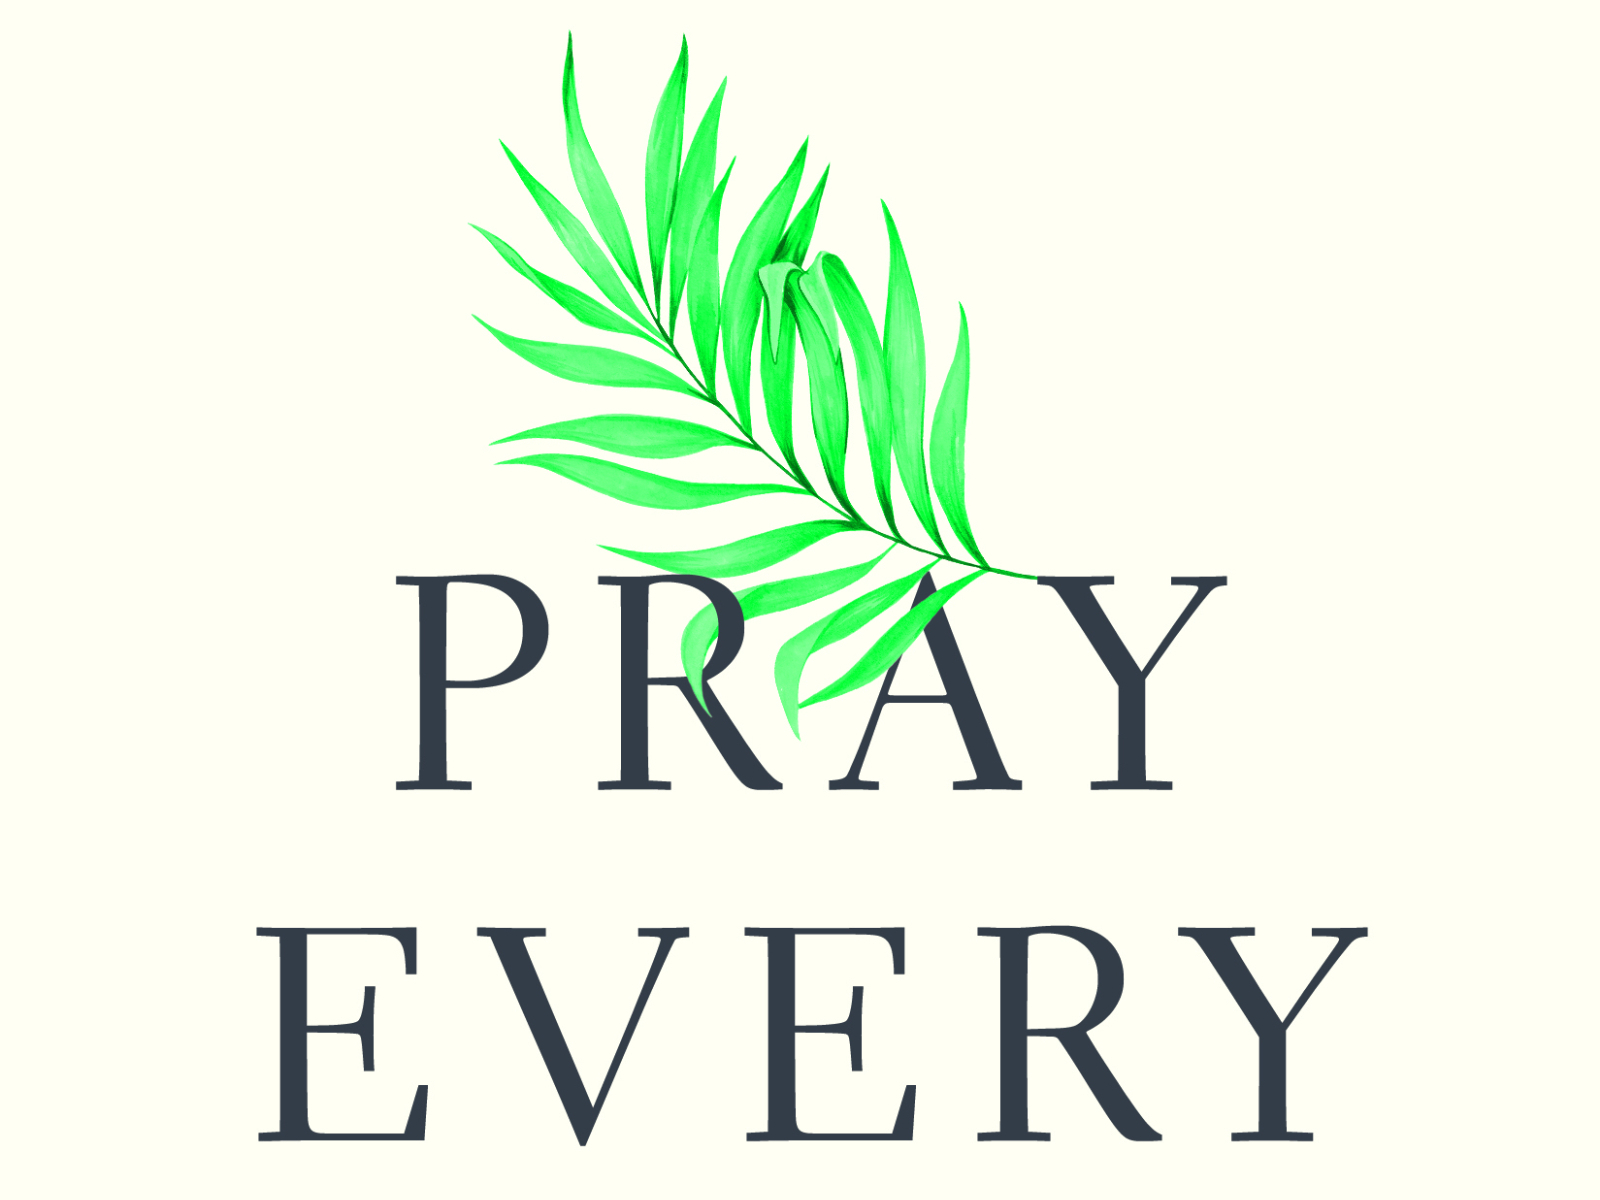 Pray Every Day by Emily Weigel on Dribbble